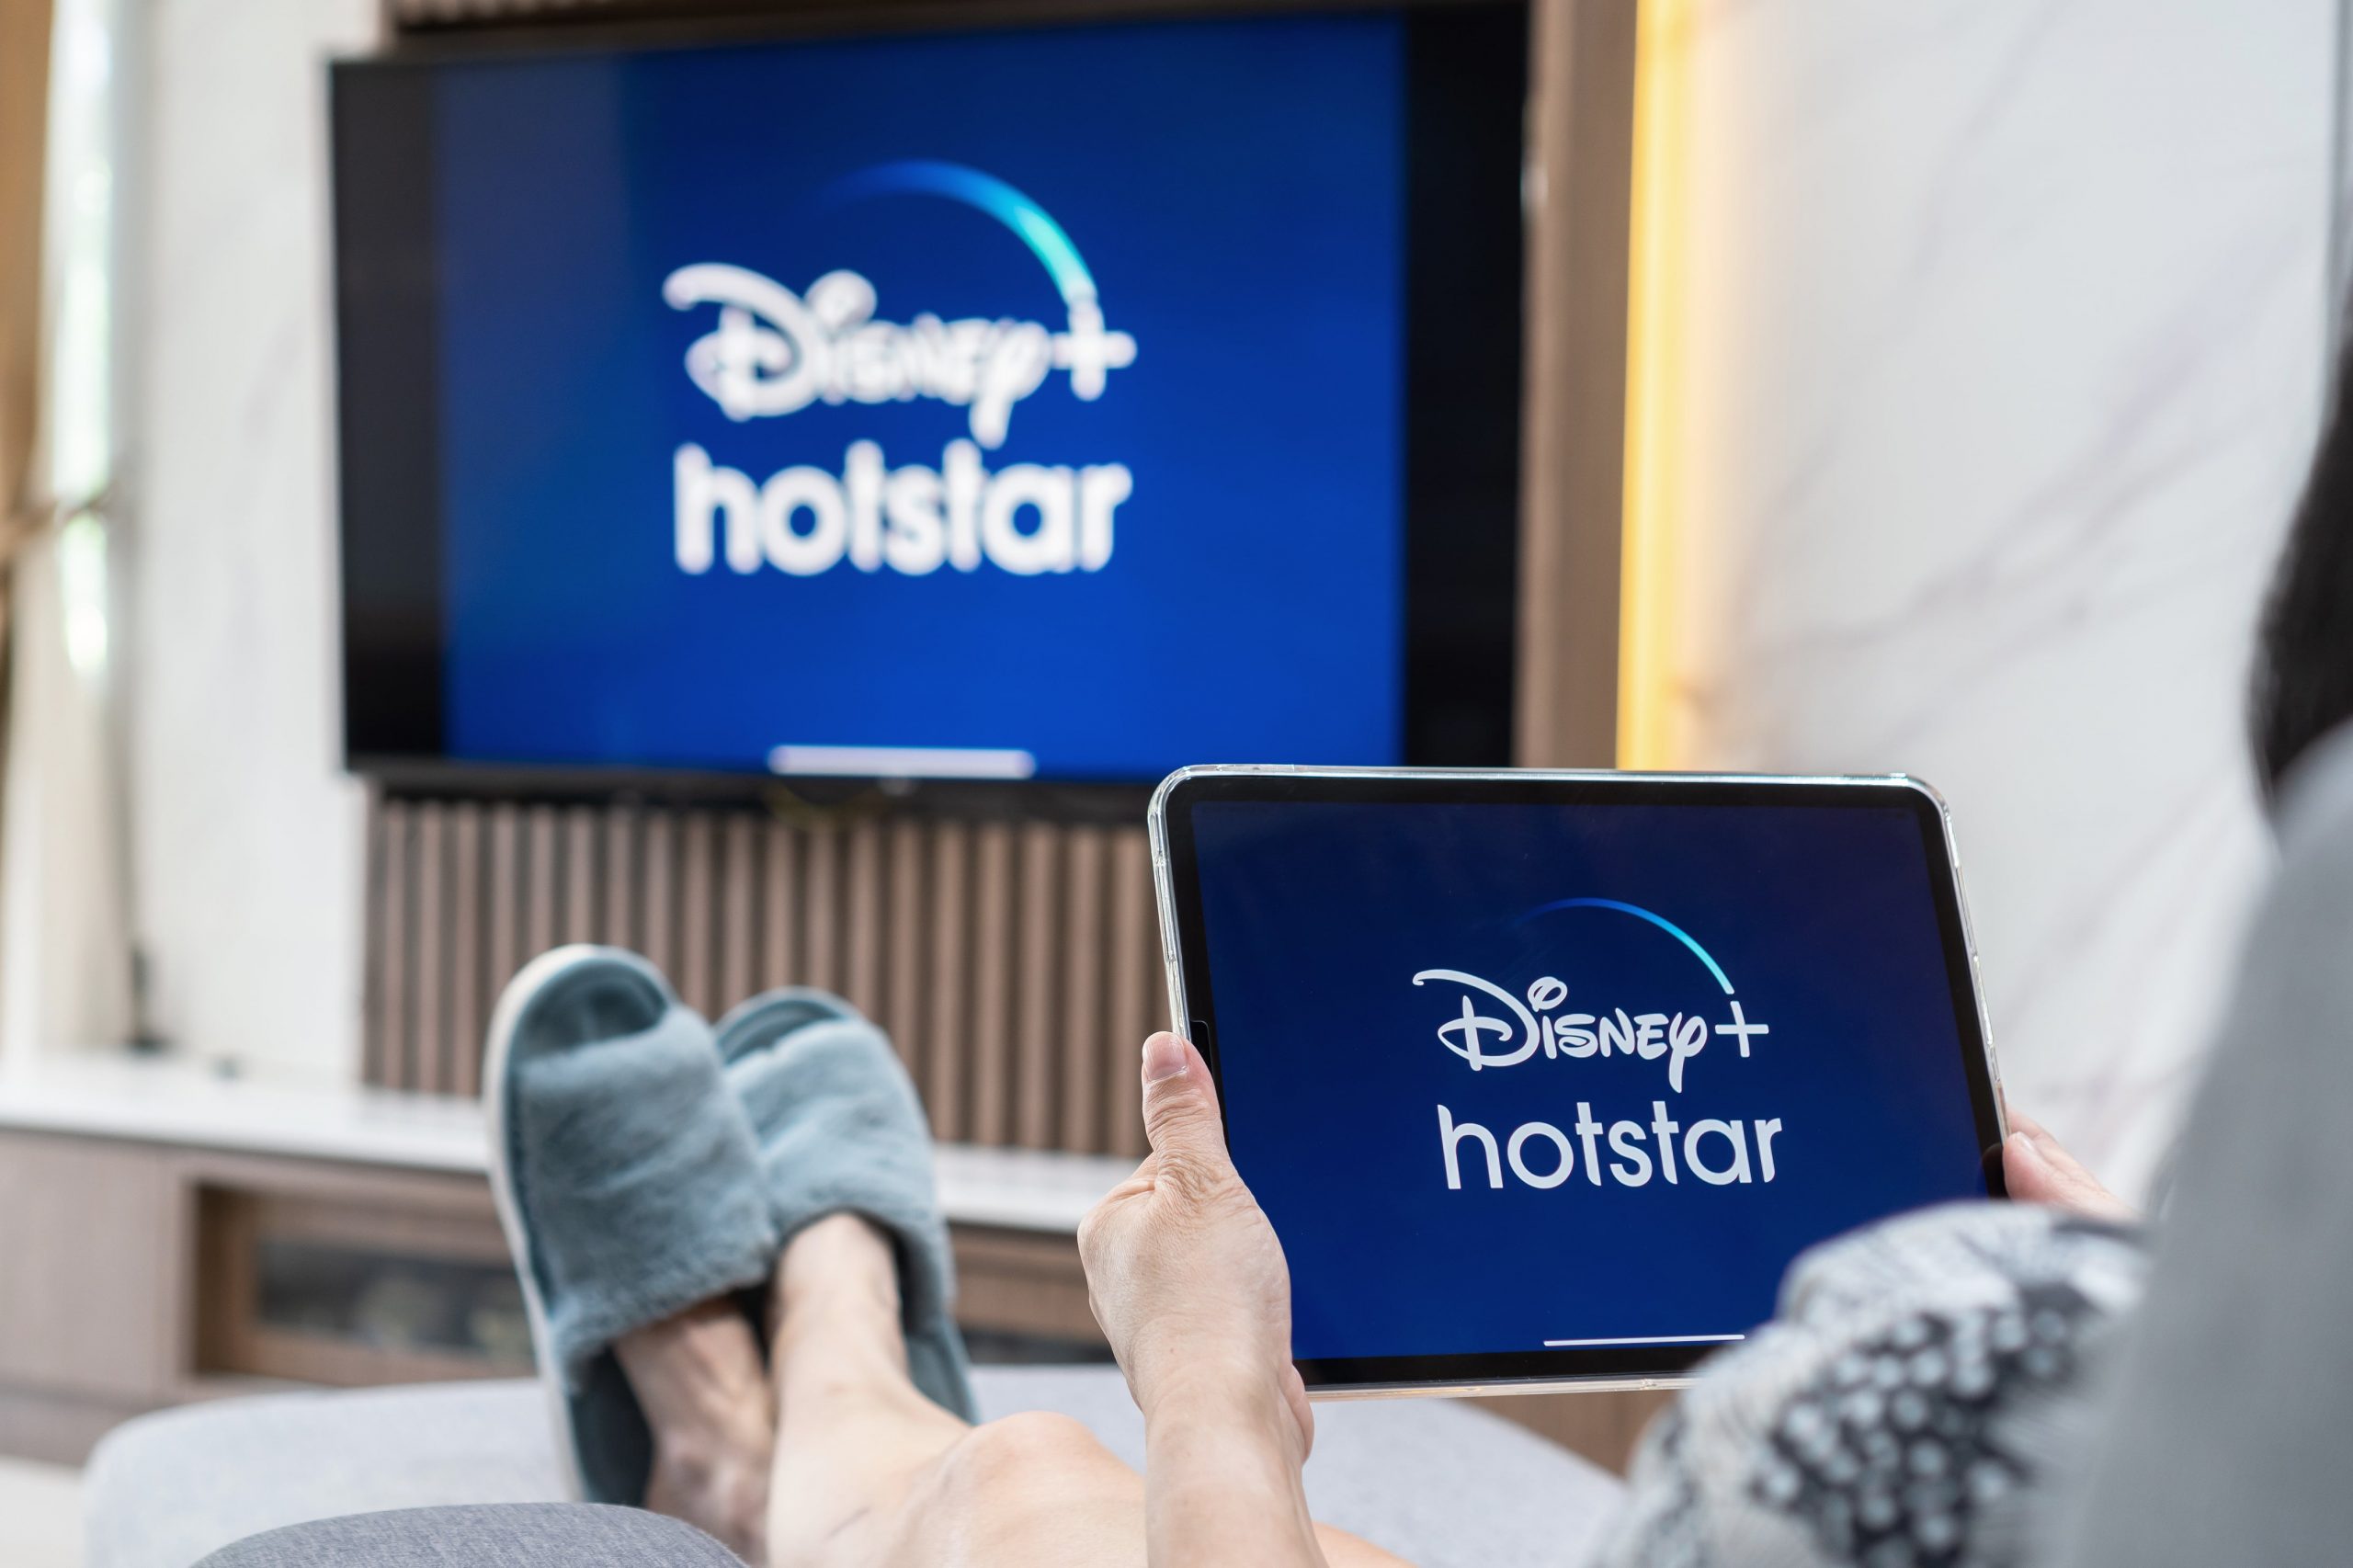 How to get Disney Plus on TV: smart TV app guide